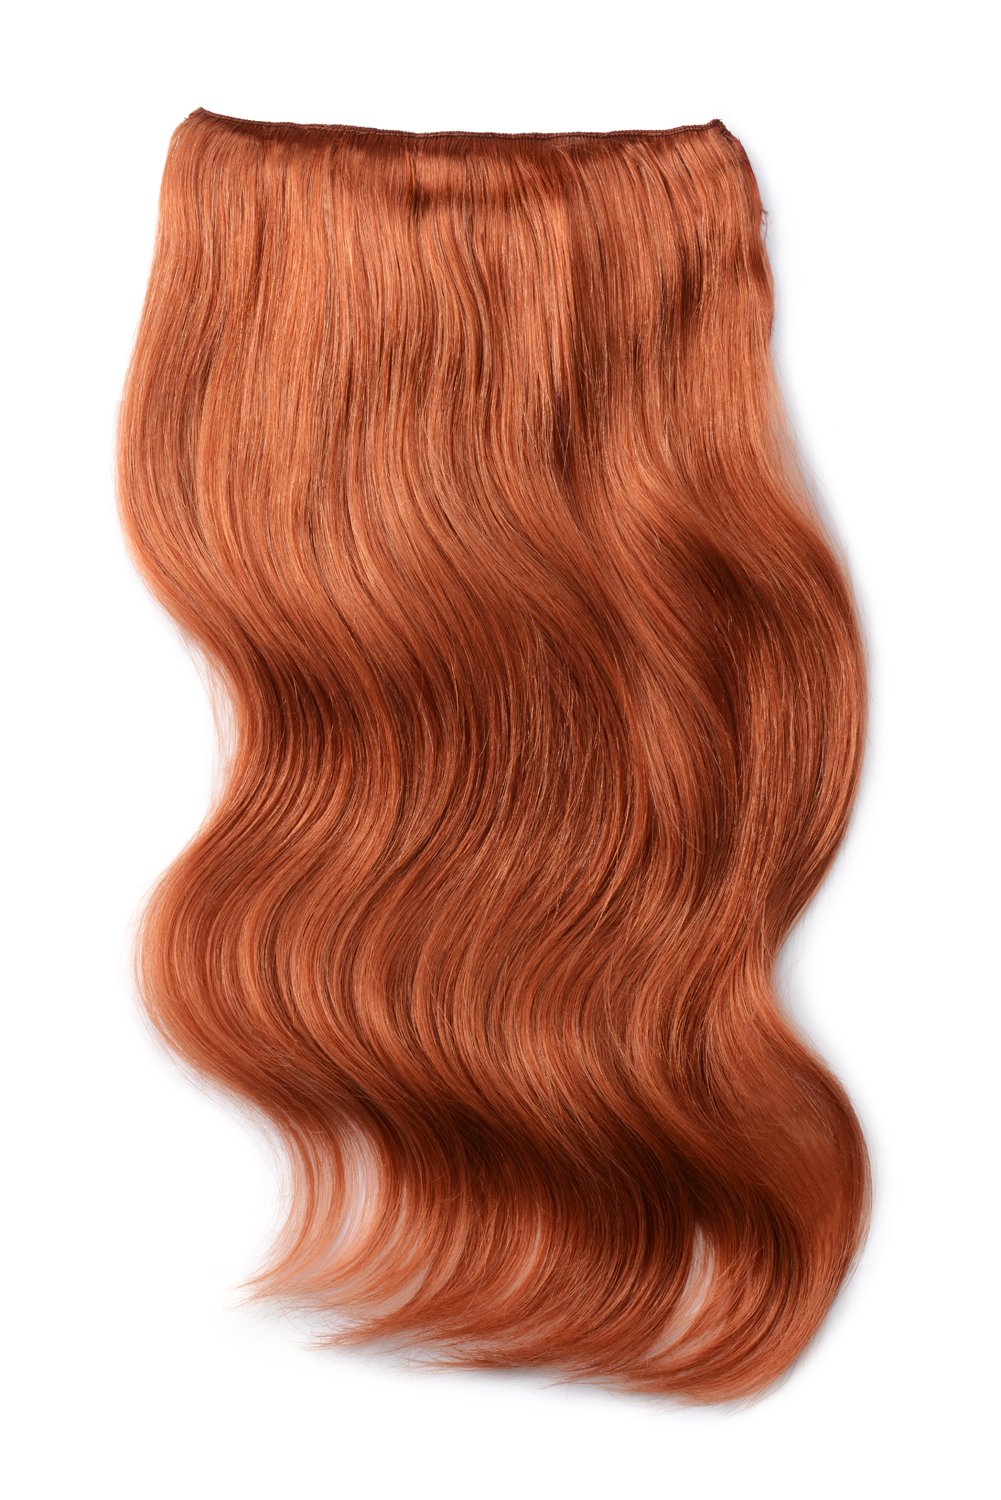 Double weft clip in hair extensions in natural red or sometimes called ginger red hair extensions. 